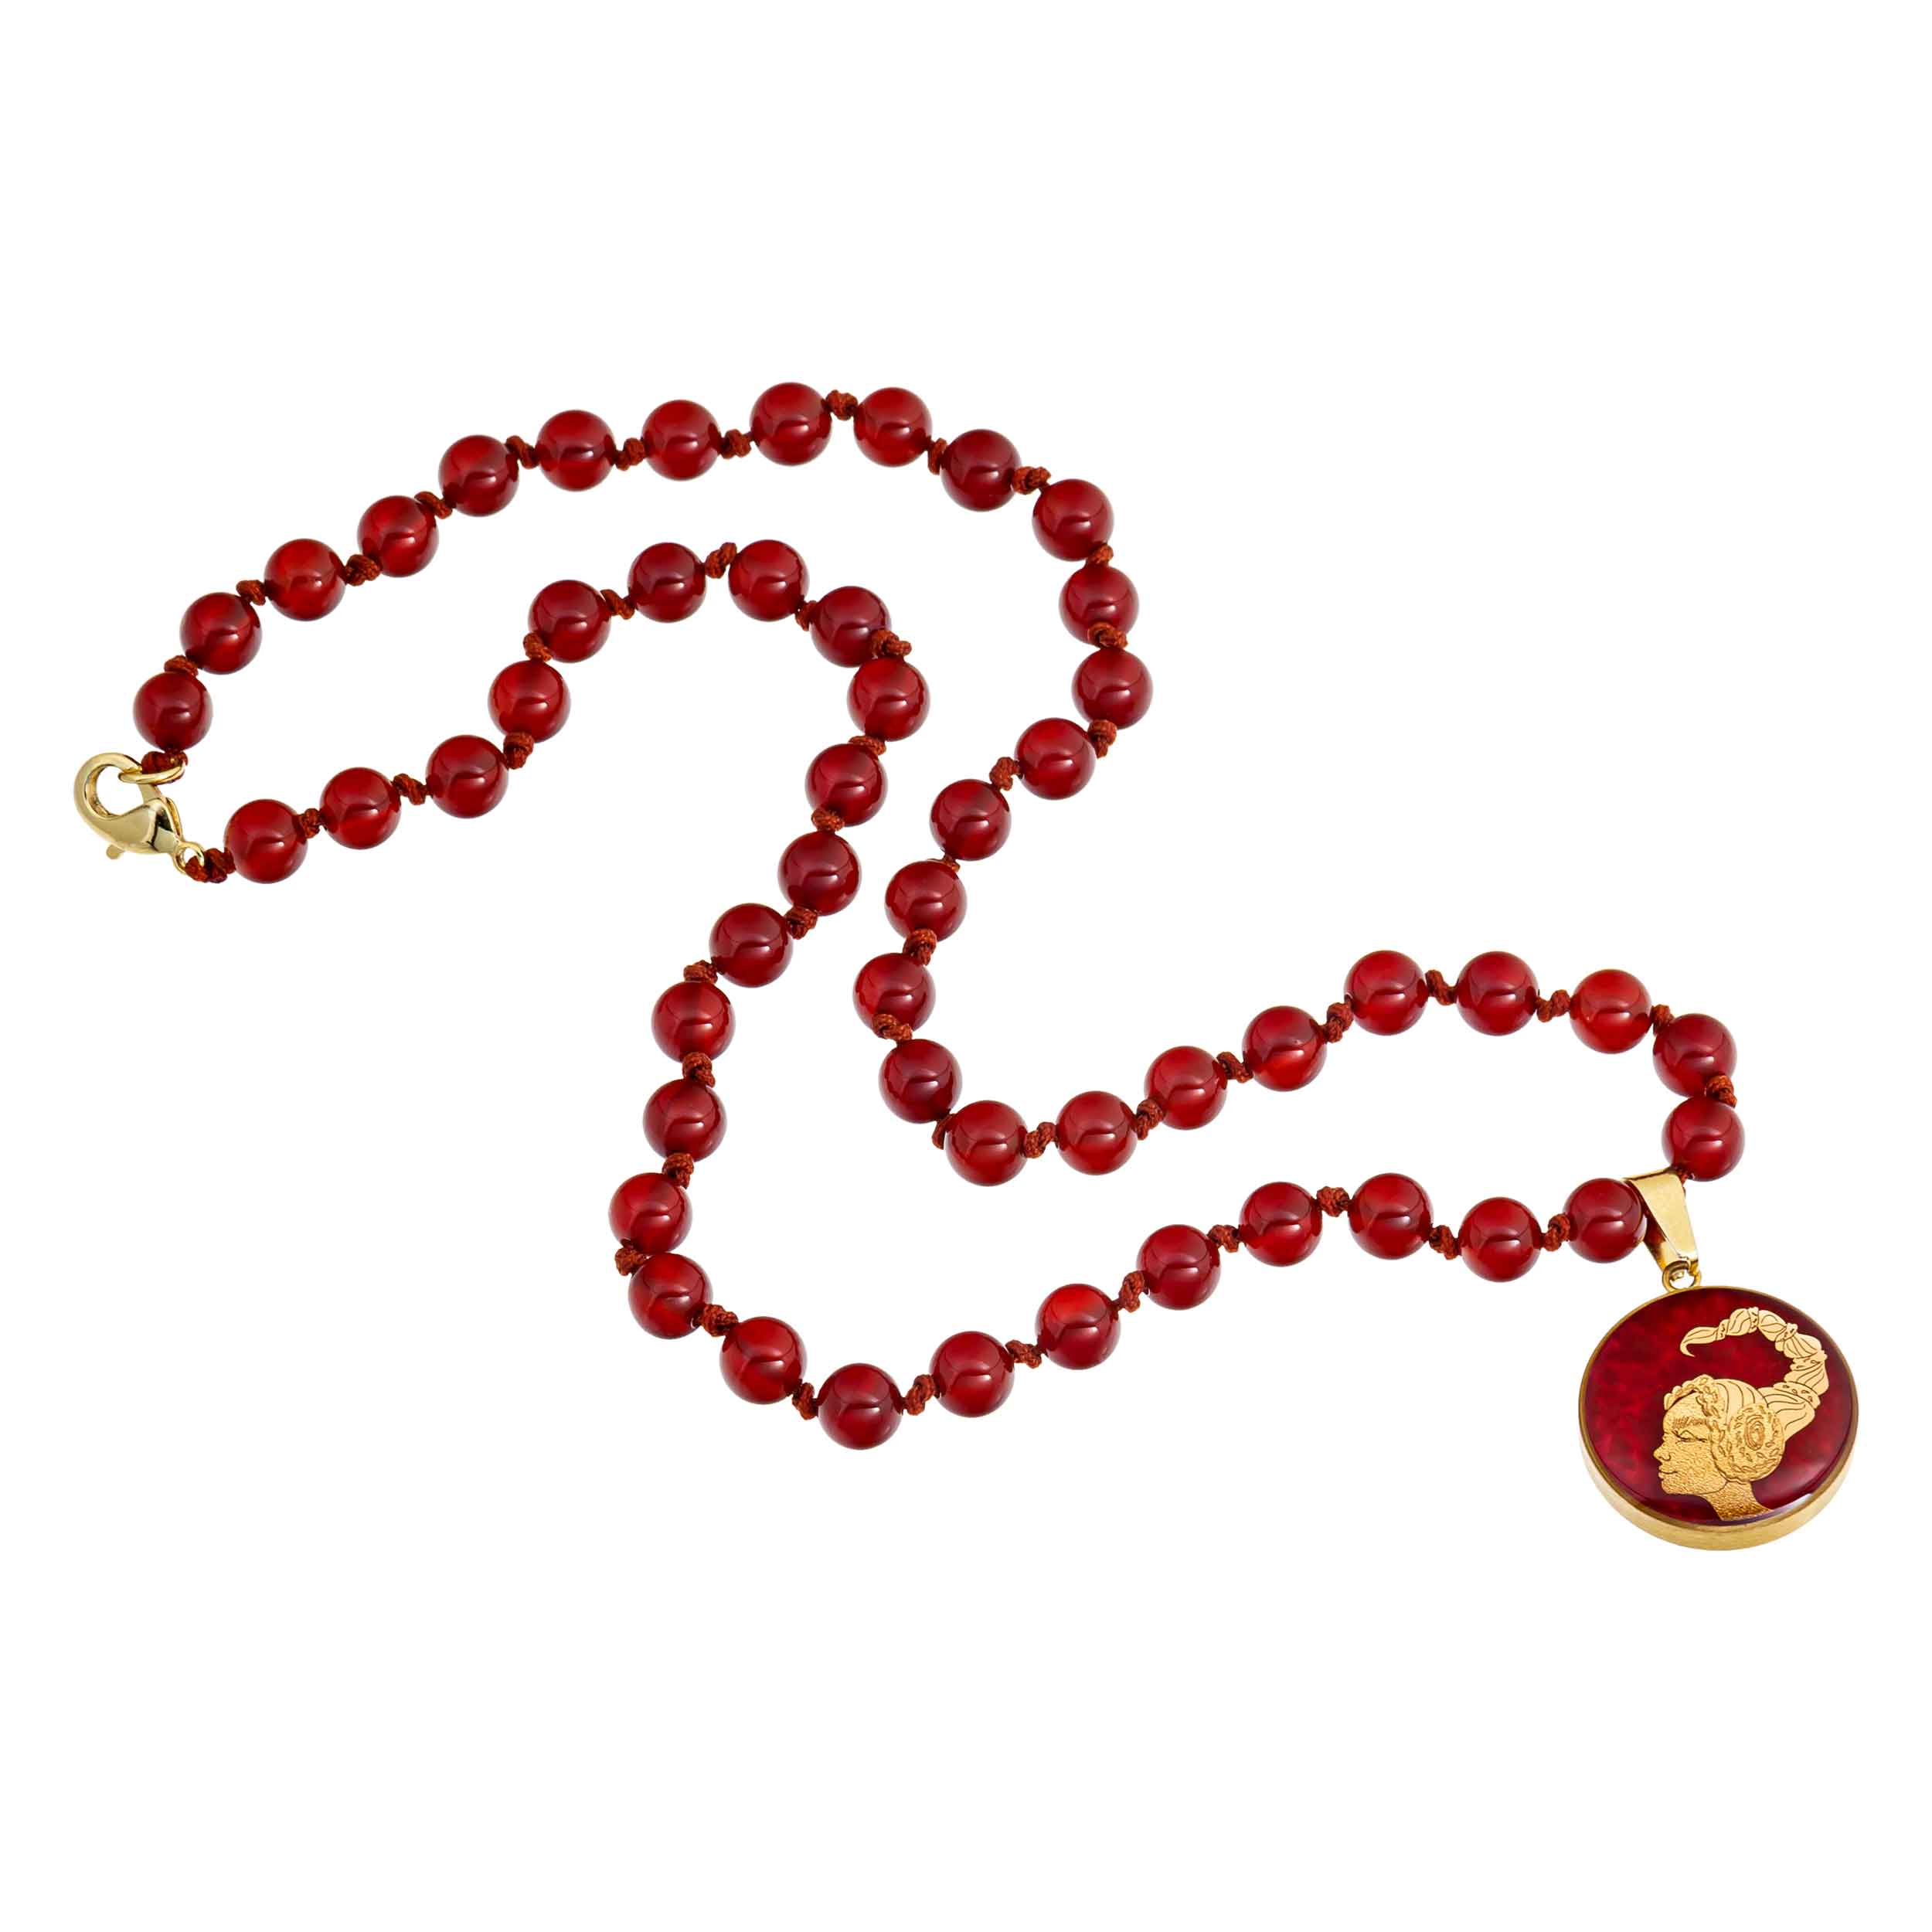 Akhraee agate necklace and 24 carat gold leaf with the symbol design of the month of Aban